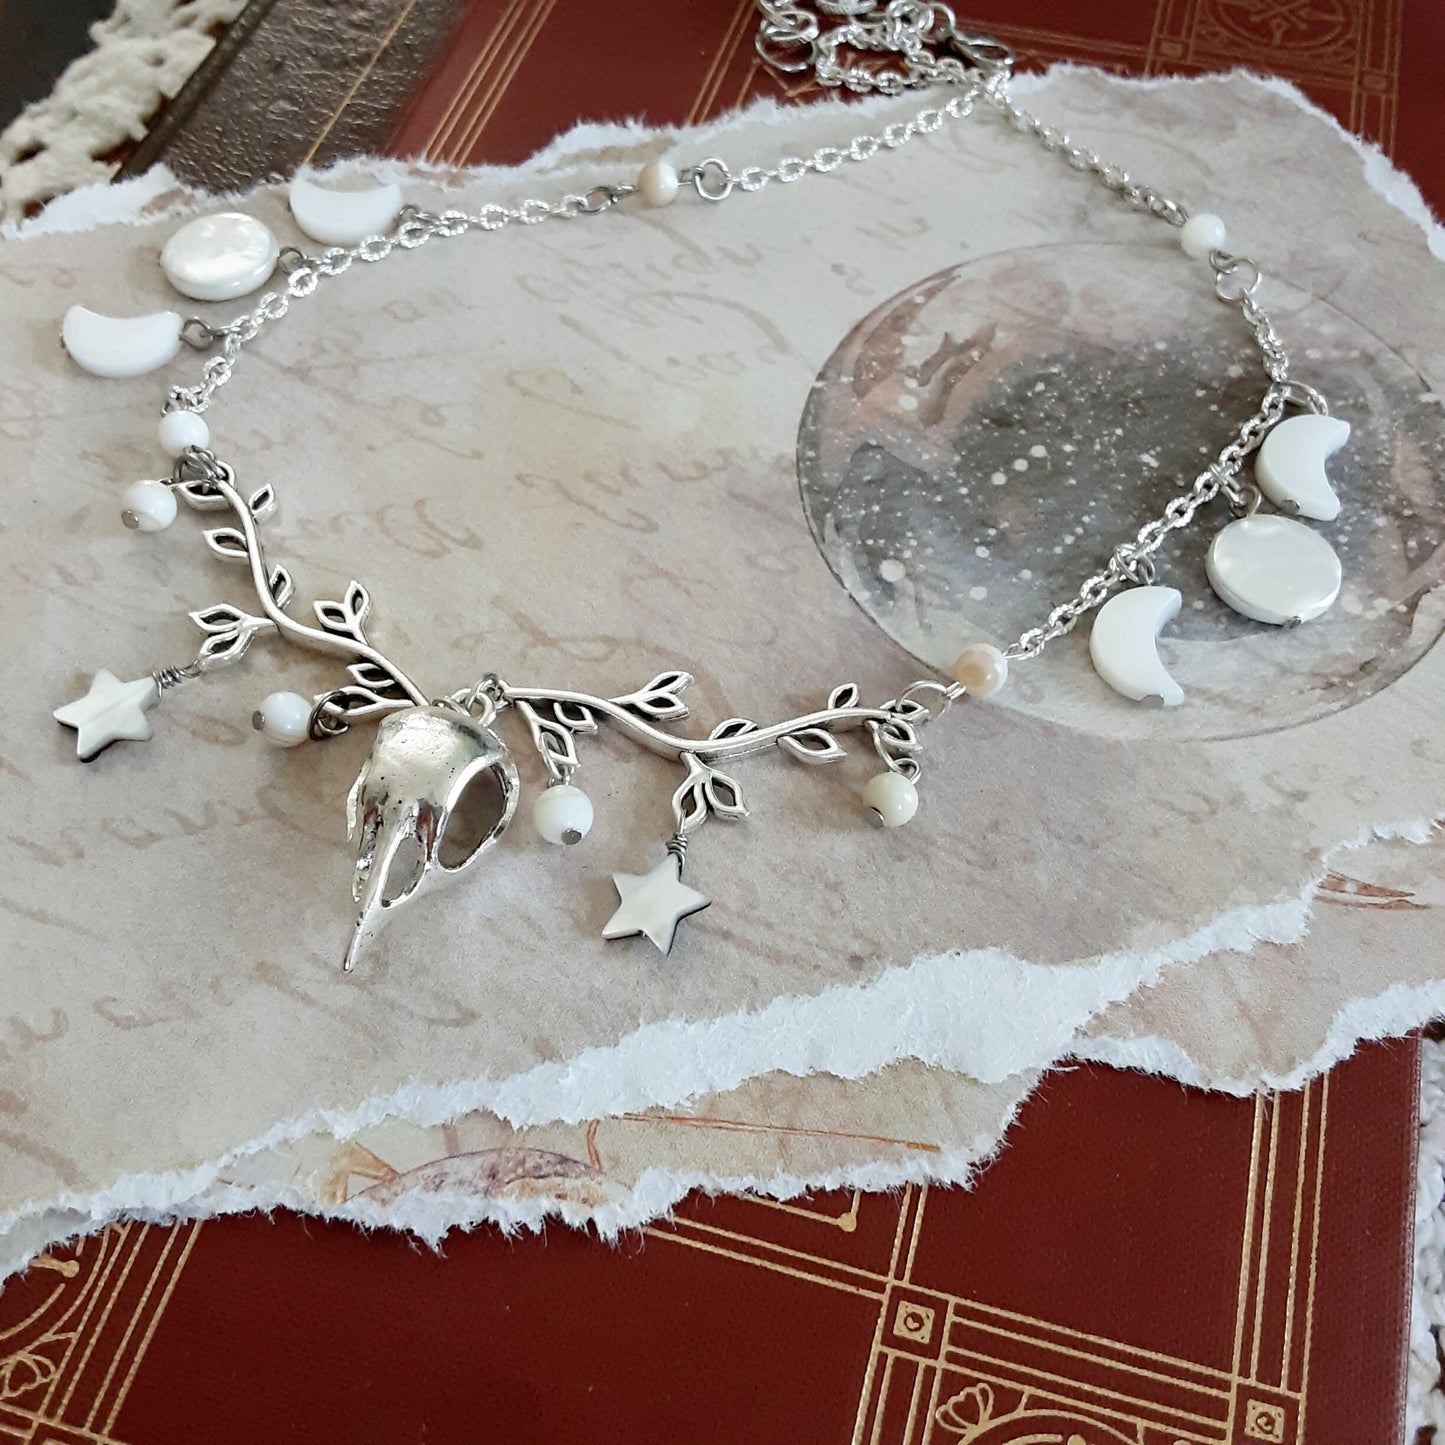 Stag Raven Antler Necklace set, Horned God Full Moon Gothic Occult Jewelry Witchy Star and Moon Phases, Triple Moon Goddess